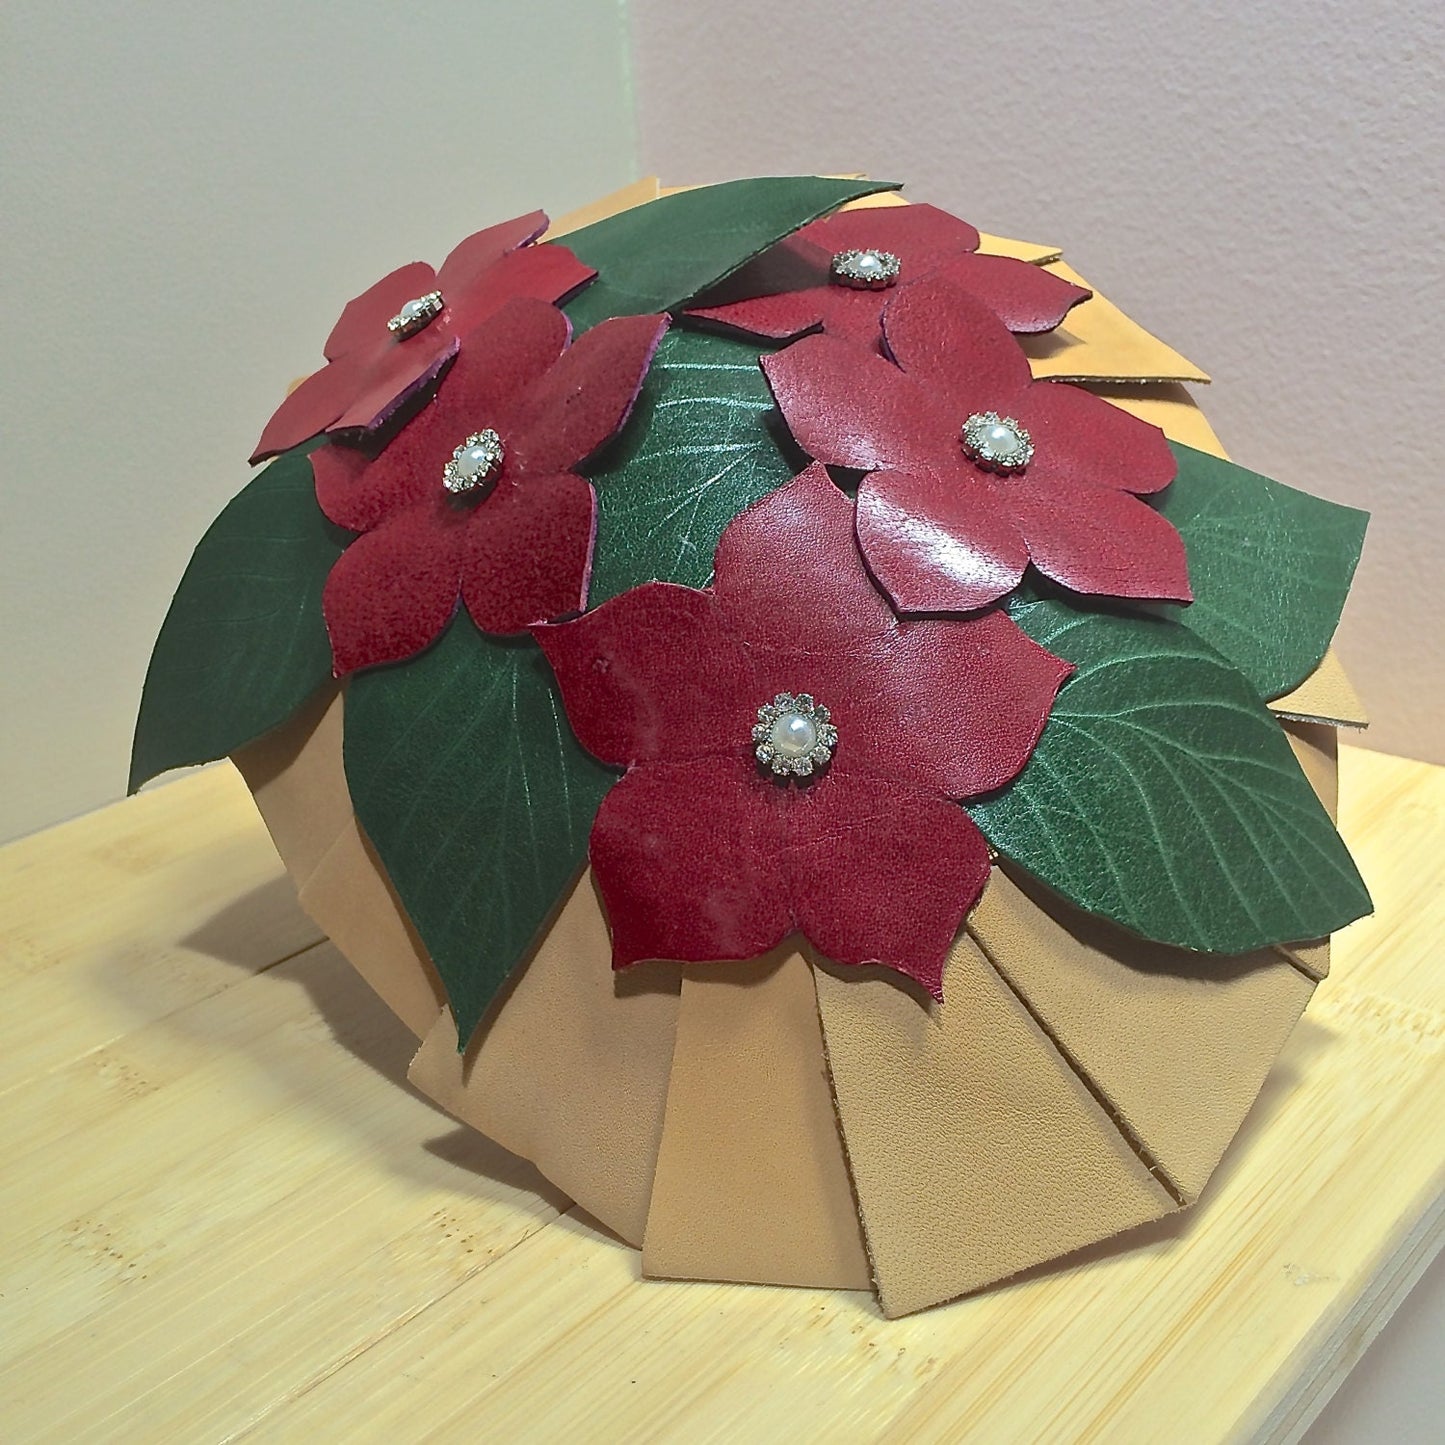 Fascinator in leather, Leather Christmas Fascinator, Christmas hat with leather flowers and jewels. Holiday Party Hat. Poinsettia flower